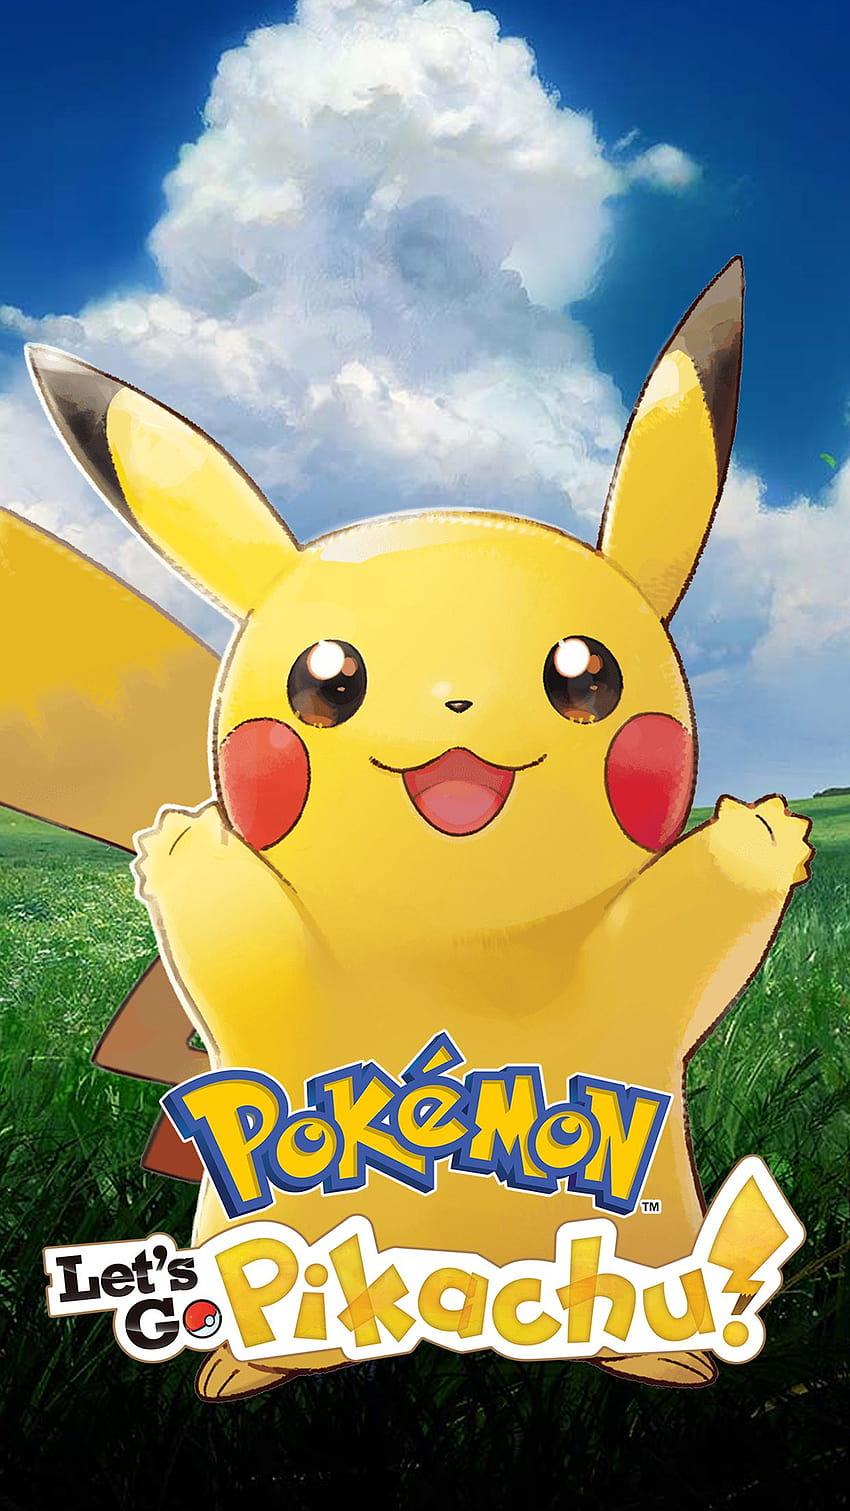 Pikachu For Iphone posted by Christopher Tremblay, pokemon lets go pikachu HD phone wallpaper